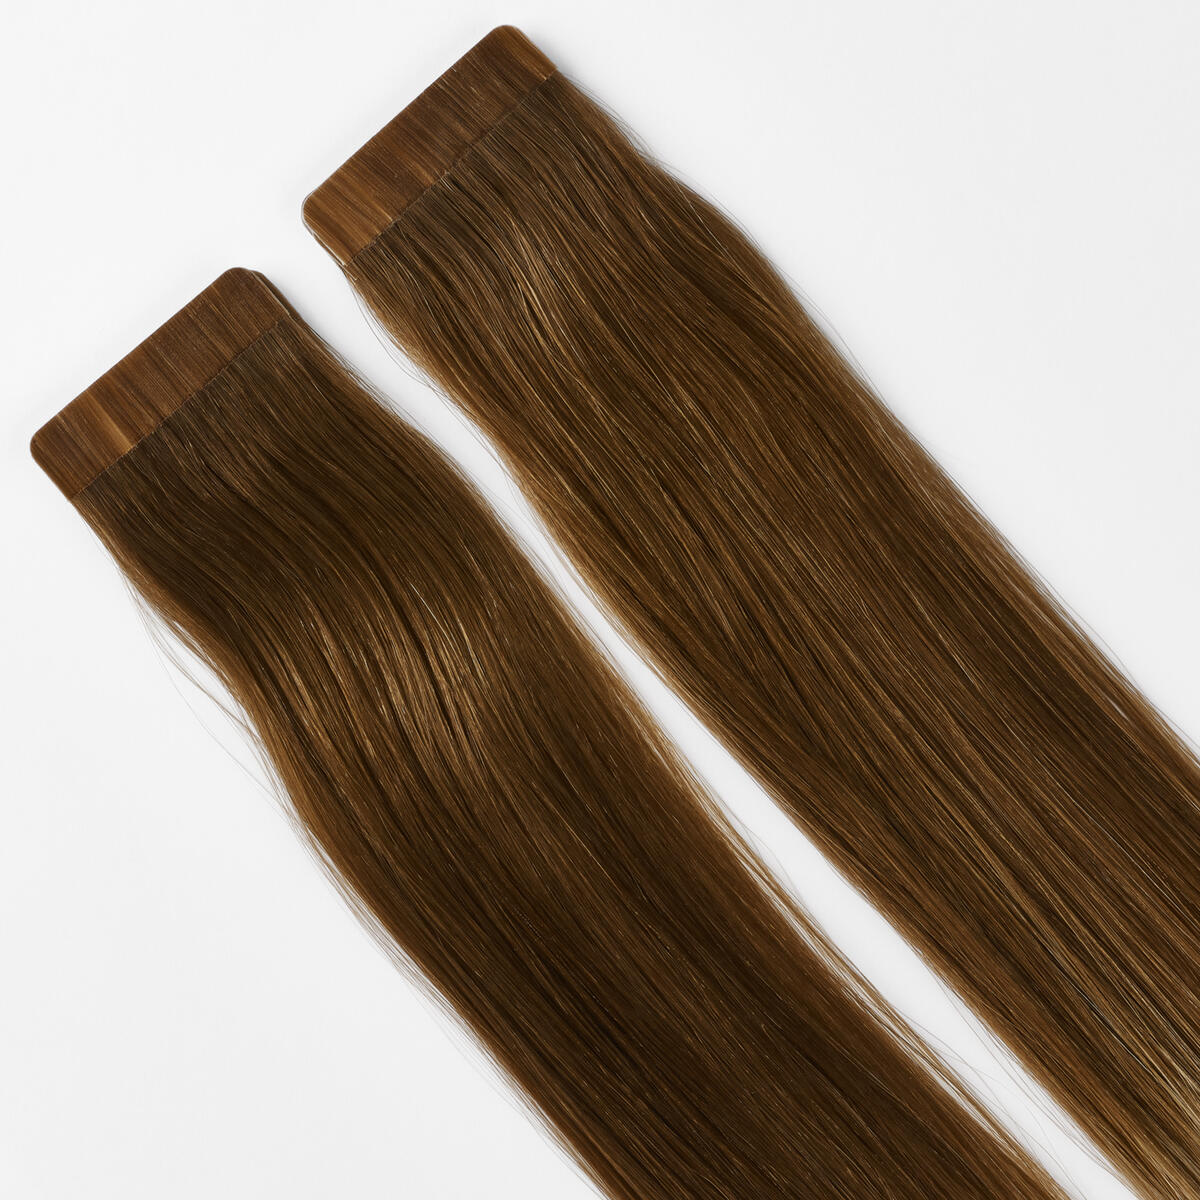 Basic Tape Extensions Classic 4 O5.1/10.8 Medium Ash Blond Ombre 40 cm